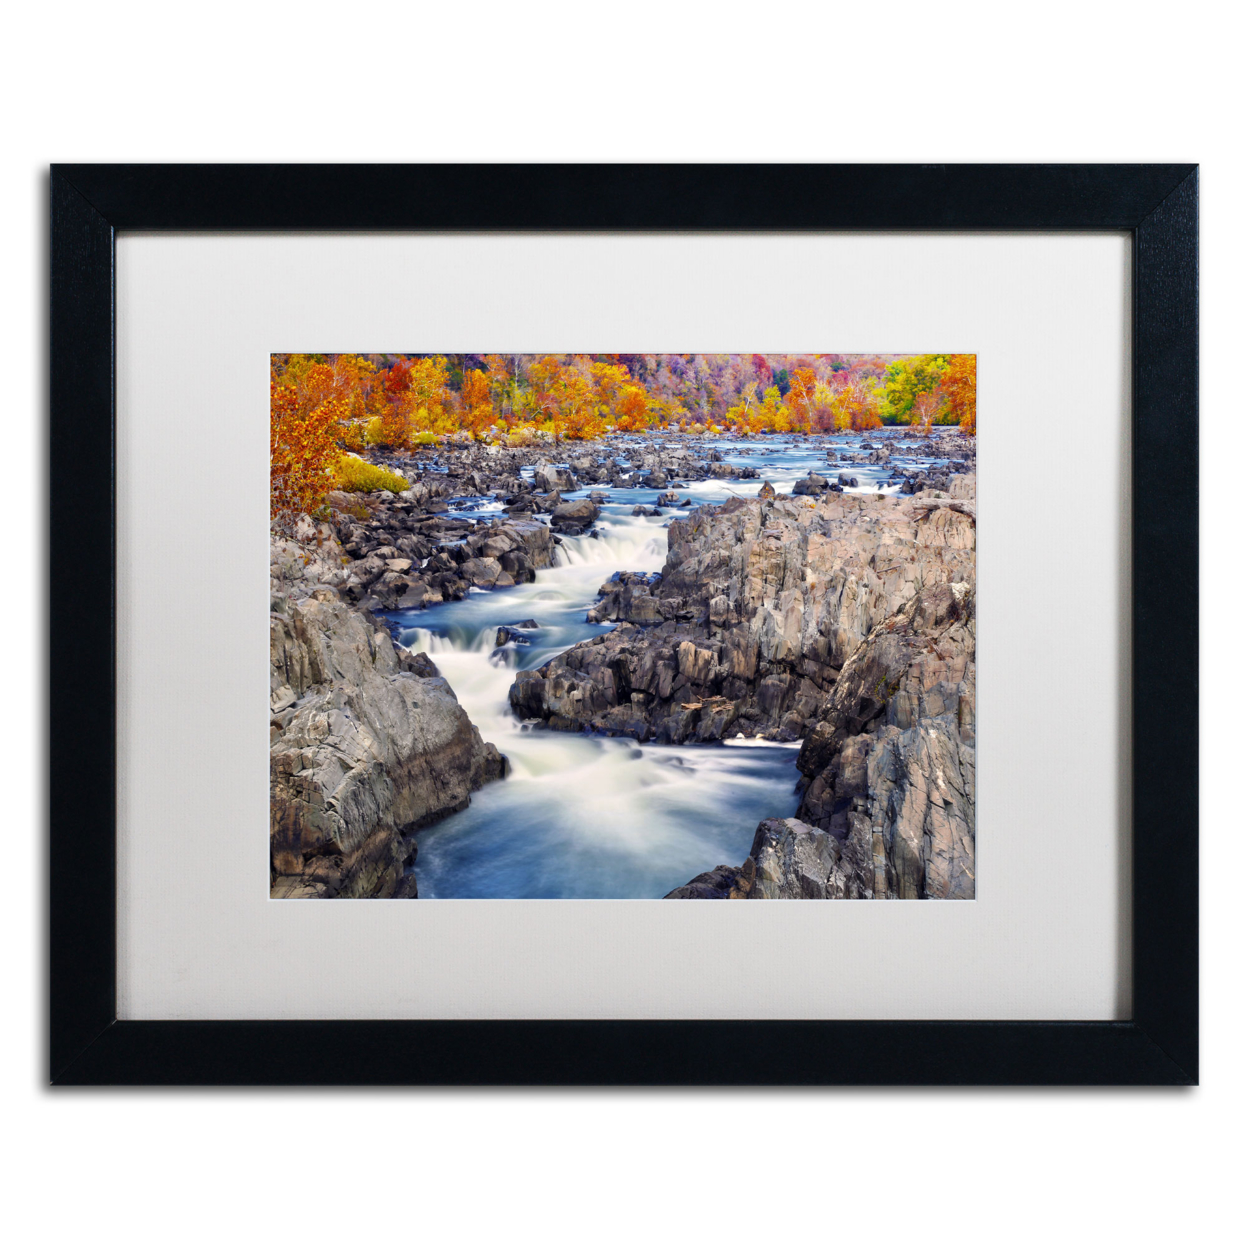 CATeyes 'Great Falls' Black Wooden Framed Art 18 X 22 Inches